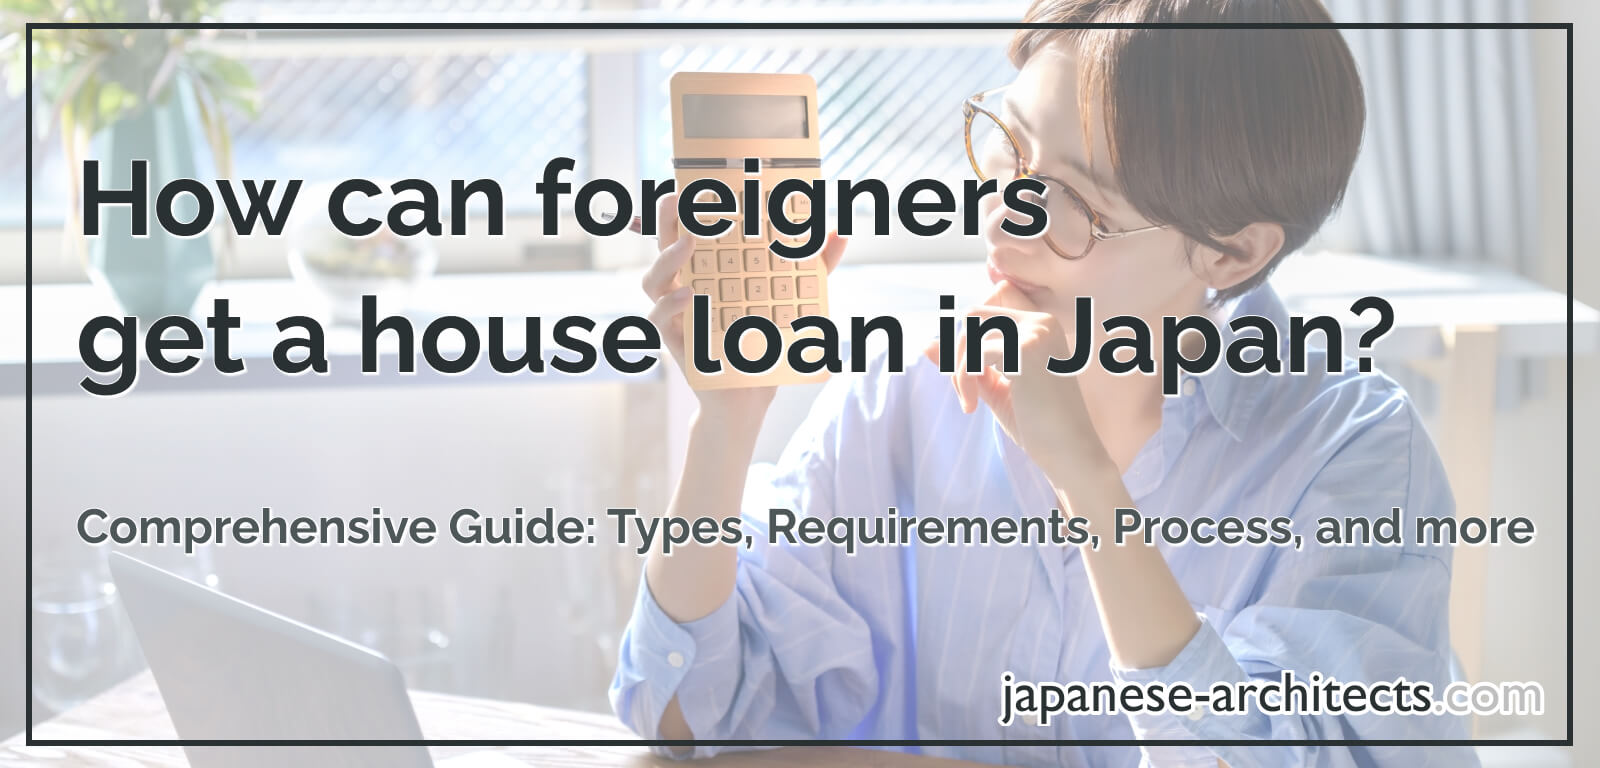 Full guide to house loan in Japan for foreigners